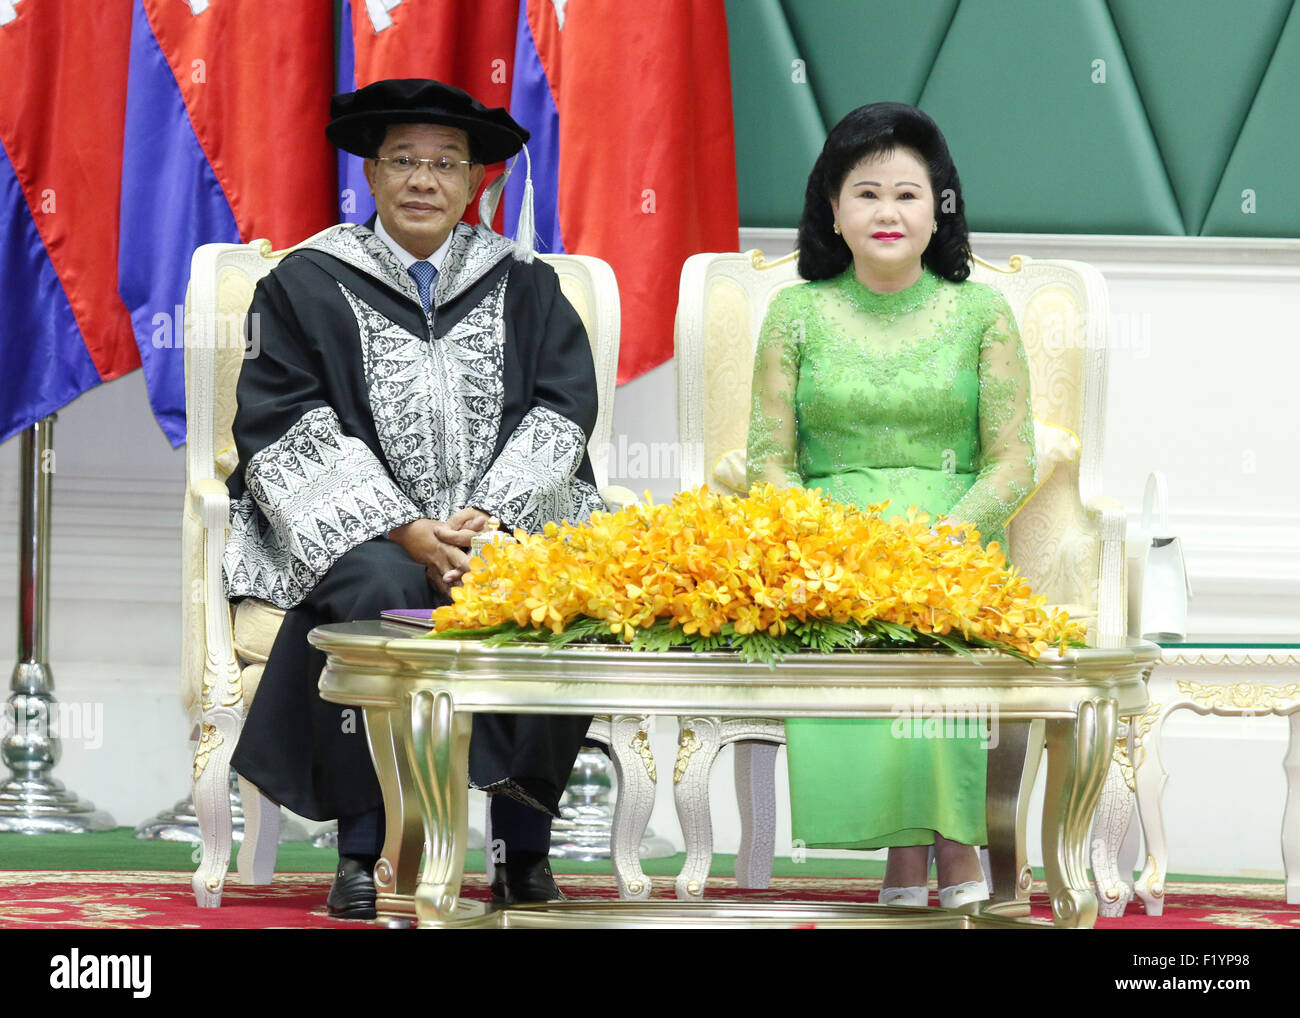 Phnom Penh, Cambodia. 9th Sep, 2015. Cambodian Prime Minister Hun Sen (L) and his wife Bun Rany attend a ceremony in Phnom Penh, Cambodia, Sept. 9, 2015. Malaysia's prestigious Limkokwing University awarded Hun Sen the Honorary Doctorate Degree of Transformational Leadership on Wednesday in a ceremony held at the Peace Palace in the Cambodian capital. © Sovannara/Xinhua/Alamy Live News Stock Photo